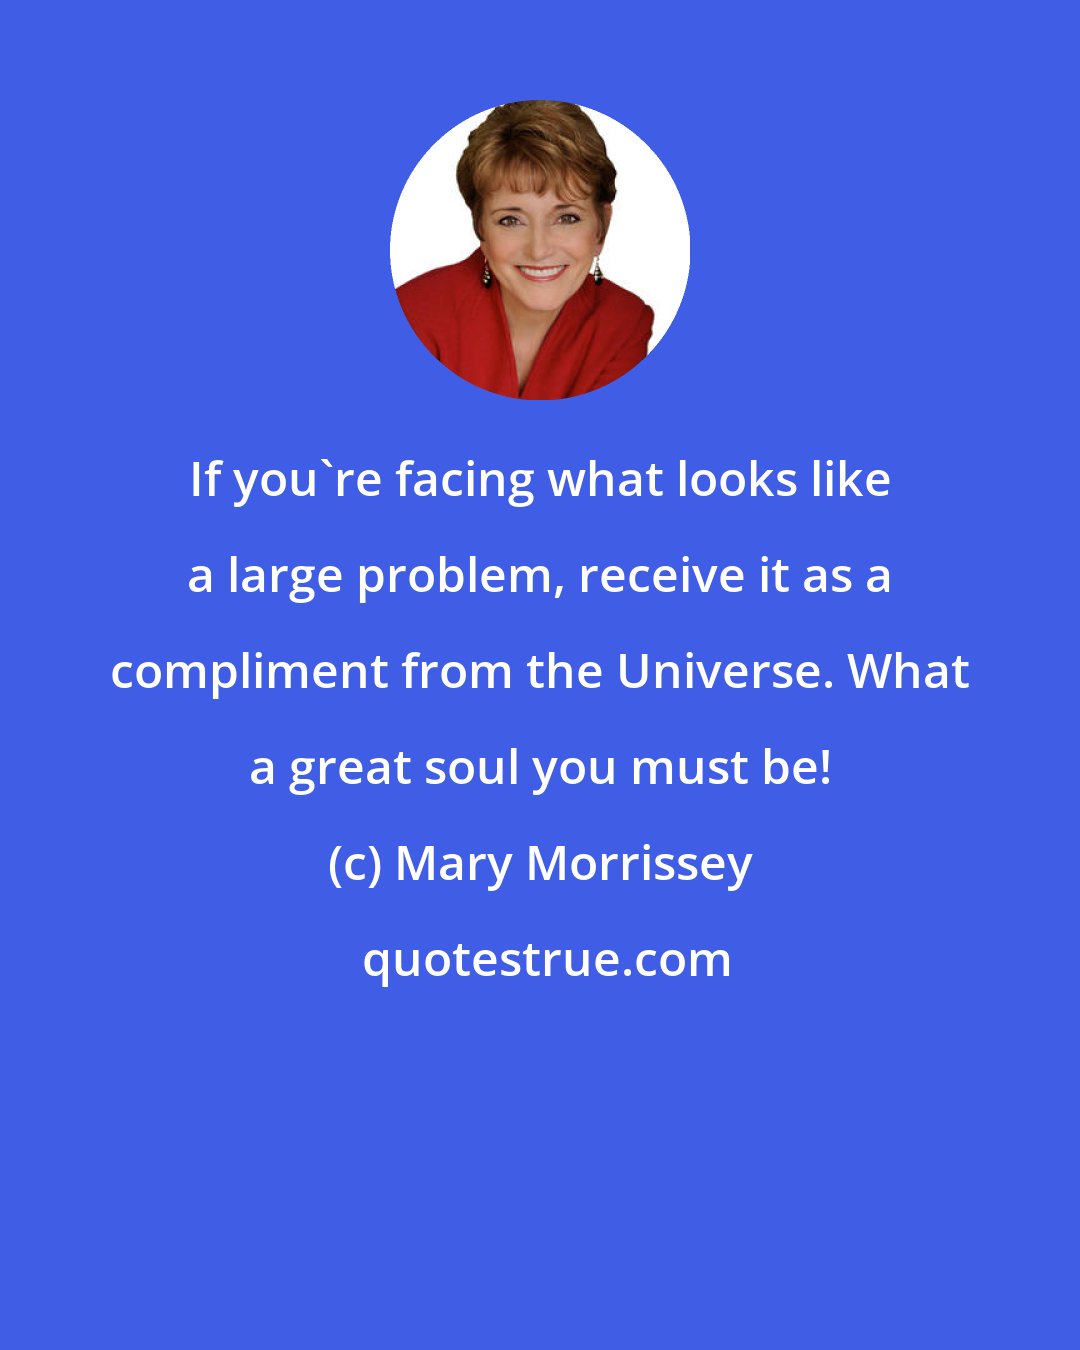 Mary Morrissey: If you're facing what looks like a large problem, receive it as a compliment from the Universe. What a great soul you must be!